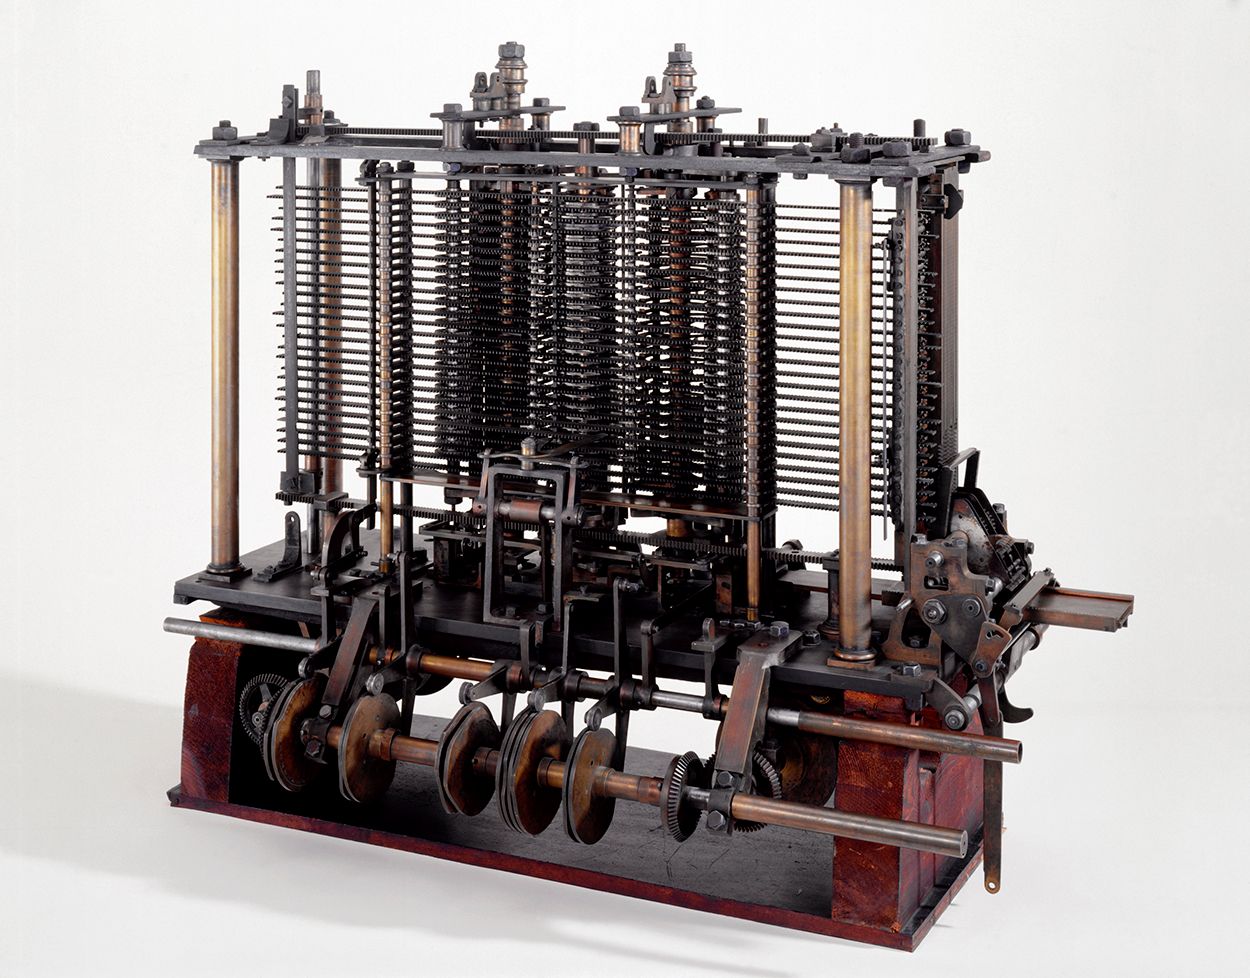 Babbages Analytical Engine, 1834-1871.